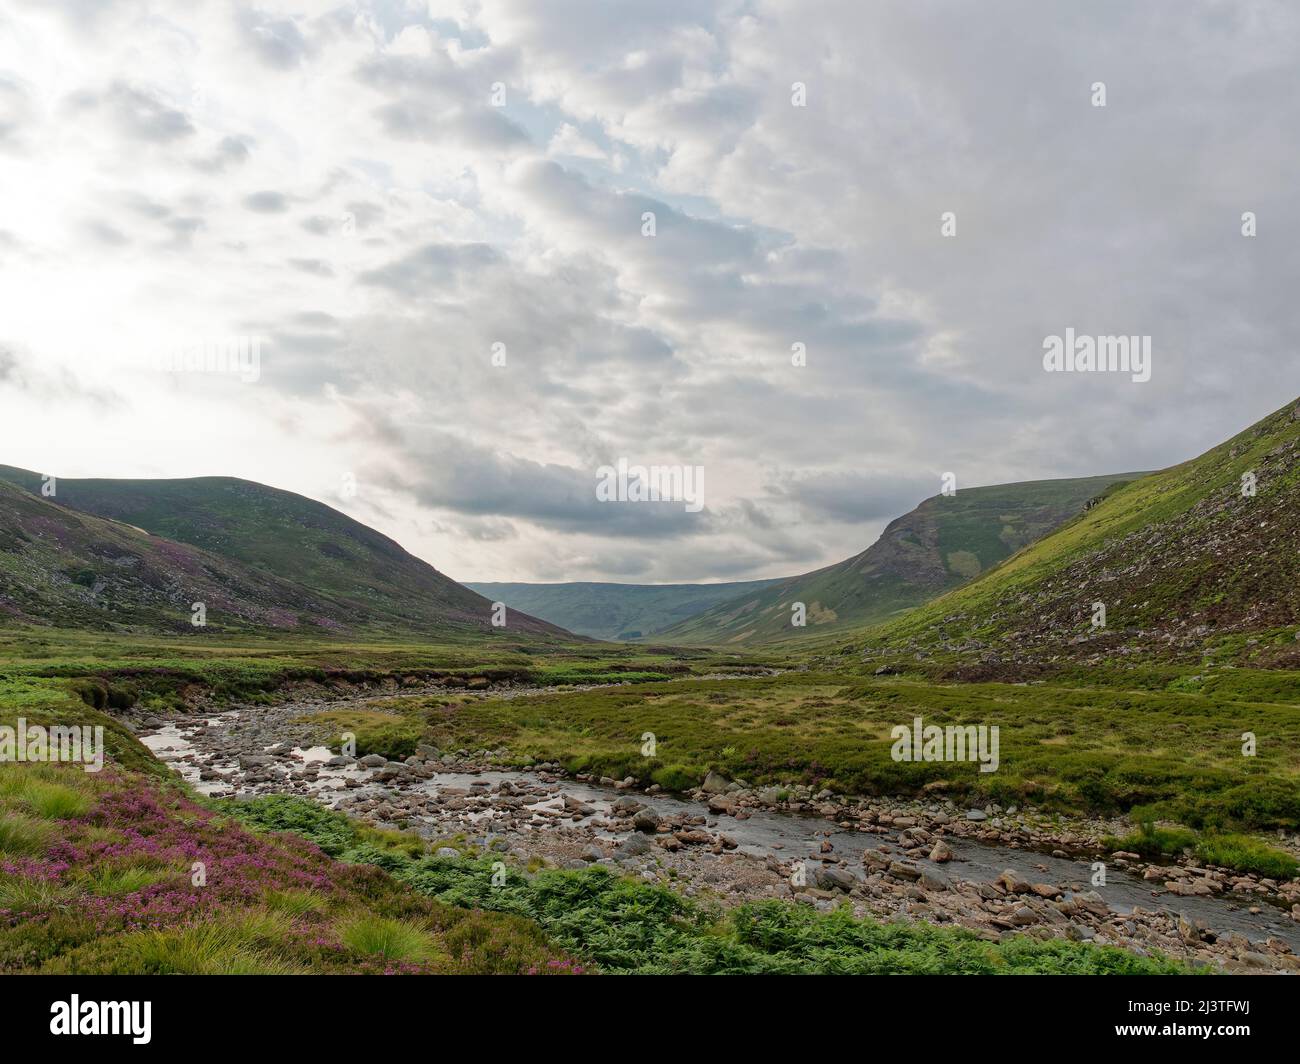 Looking down the Valley of Glen Lethnot with the Waters of Saugh gently meandering down the flat Valley Floor under the building dark clouds. Stock Photo